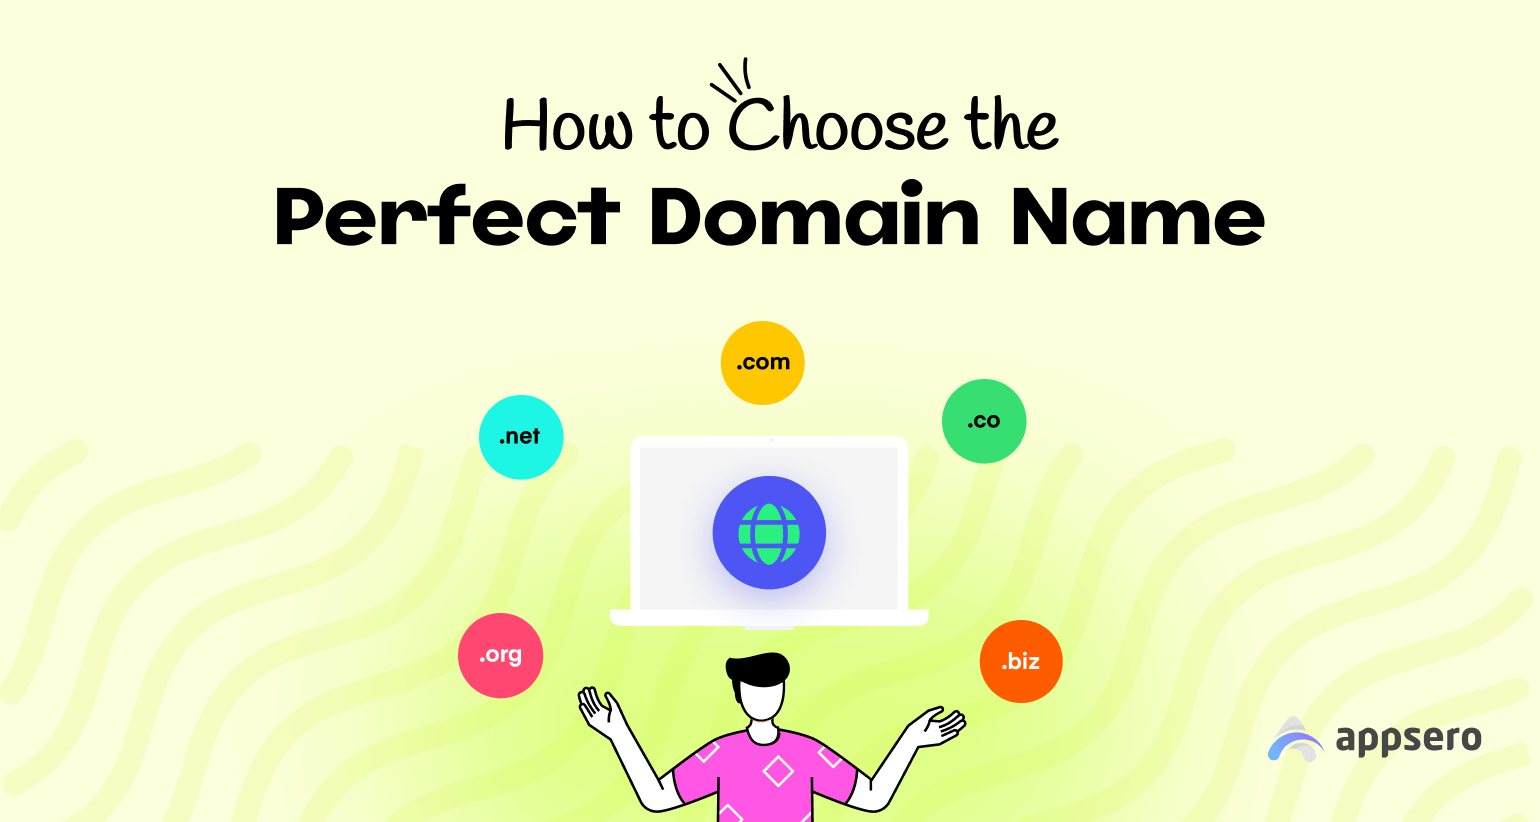 How to choose the perfect domain name for business